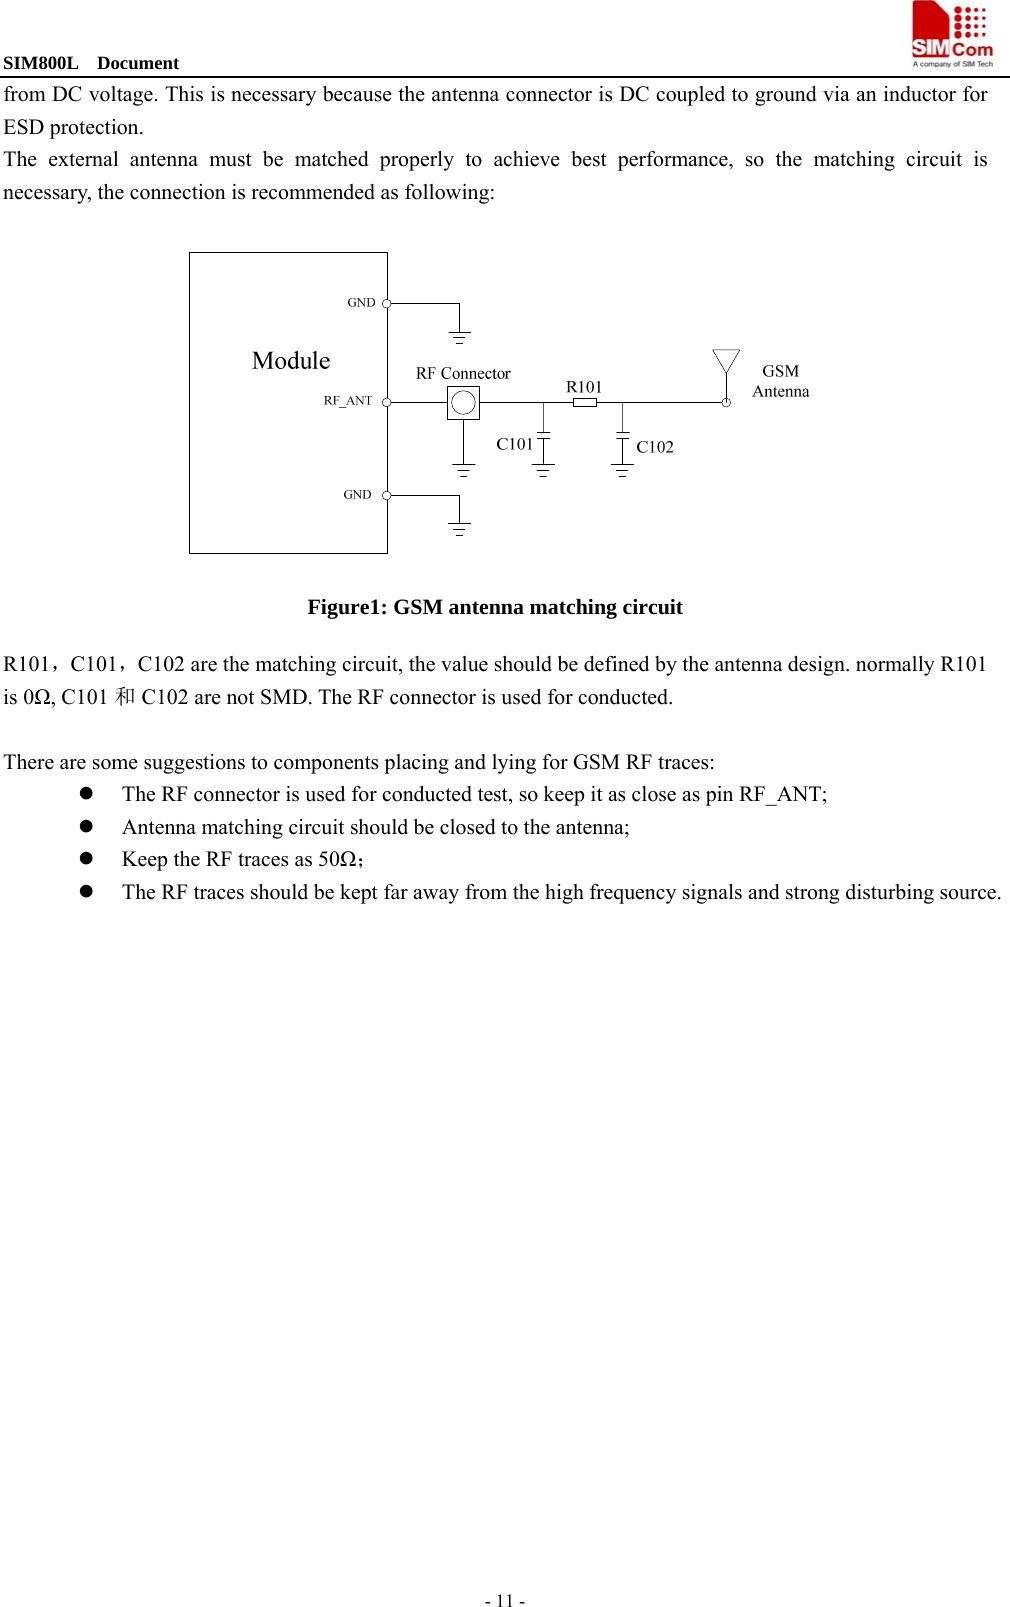 SIM800L  Document                                                                                - 11 - from DC voltage. This is necessary because the antenna connector is DC coupled to ground via an inductor for ESD protection. The external antenna must be matched properly to achieve best performance, so the matching circuit is necessary, the connection is recommended as following:   Figure1: GSM antenna matching circuit R101，C101，C102 are the matching circuit, the value should be defined by the antenna design. normally R101 is 0Ω, C101 和C102 are not SMD. The RF connector is used for conducted.    There are some suggestions to components placing and lying for GSM RF traces:    The RF connector is used for conducted test, so keep it as close as pin RF_ANT;  Antenna matching circuit should be closed to the antenna;  Keep the RF traces as 50Ω；  The RF traces should be kept far away from the high frequency signals and strong disturbing source.    